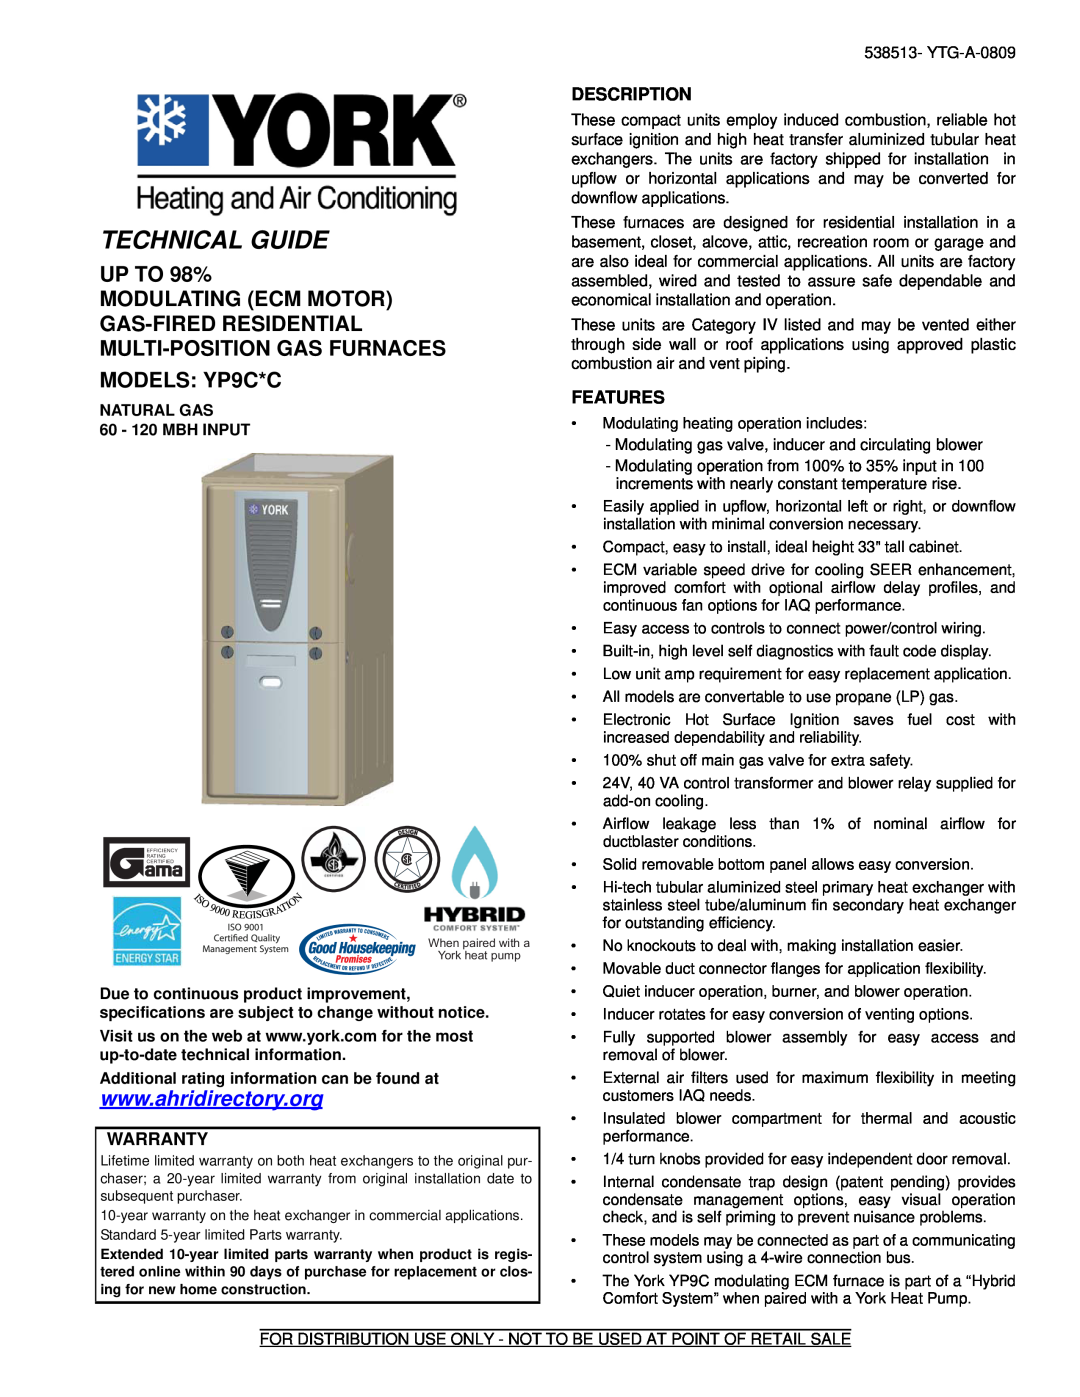 York warranty Warranty, Description, Features, Technical Guide, UP TO 98%, MODELS YP9C*C 